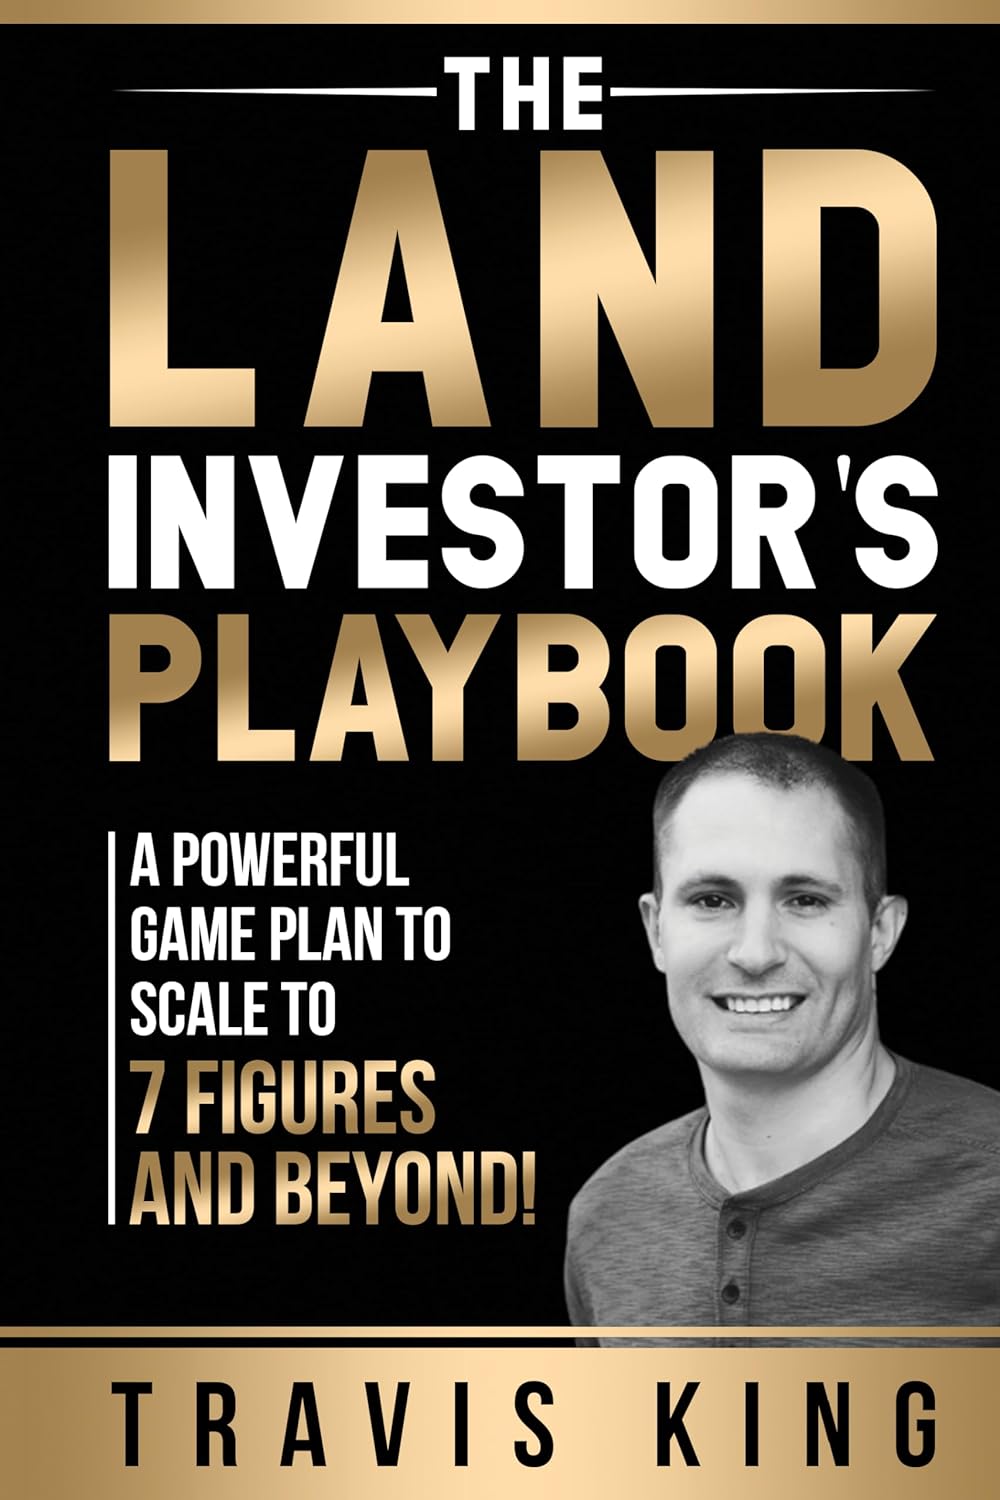 The Land Investor’s Playbook